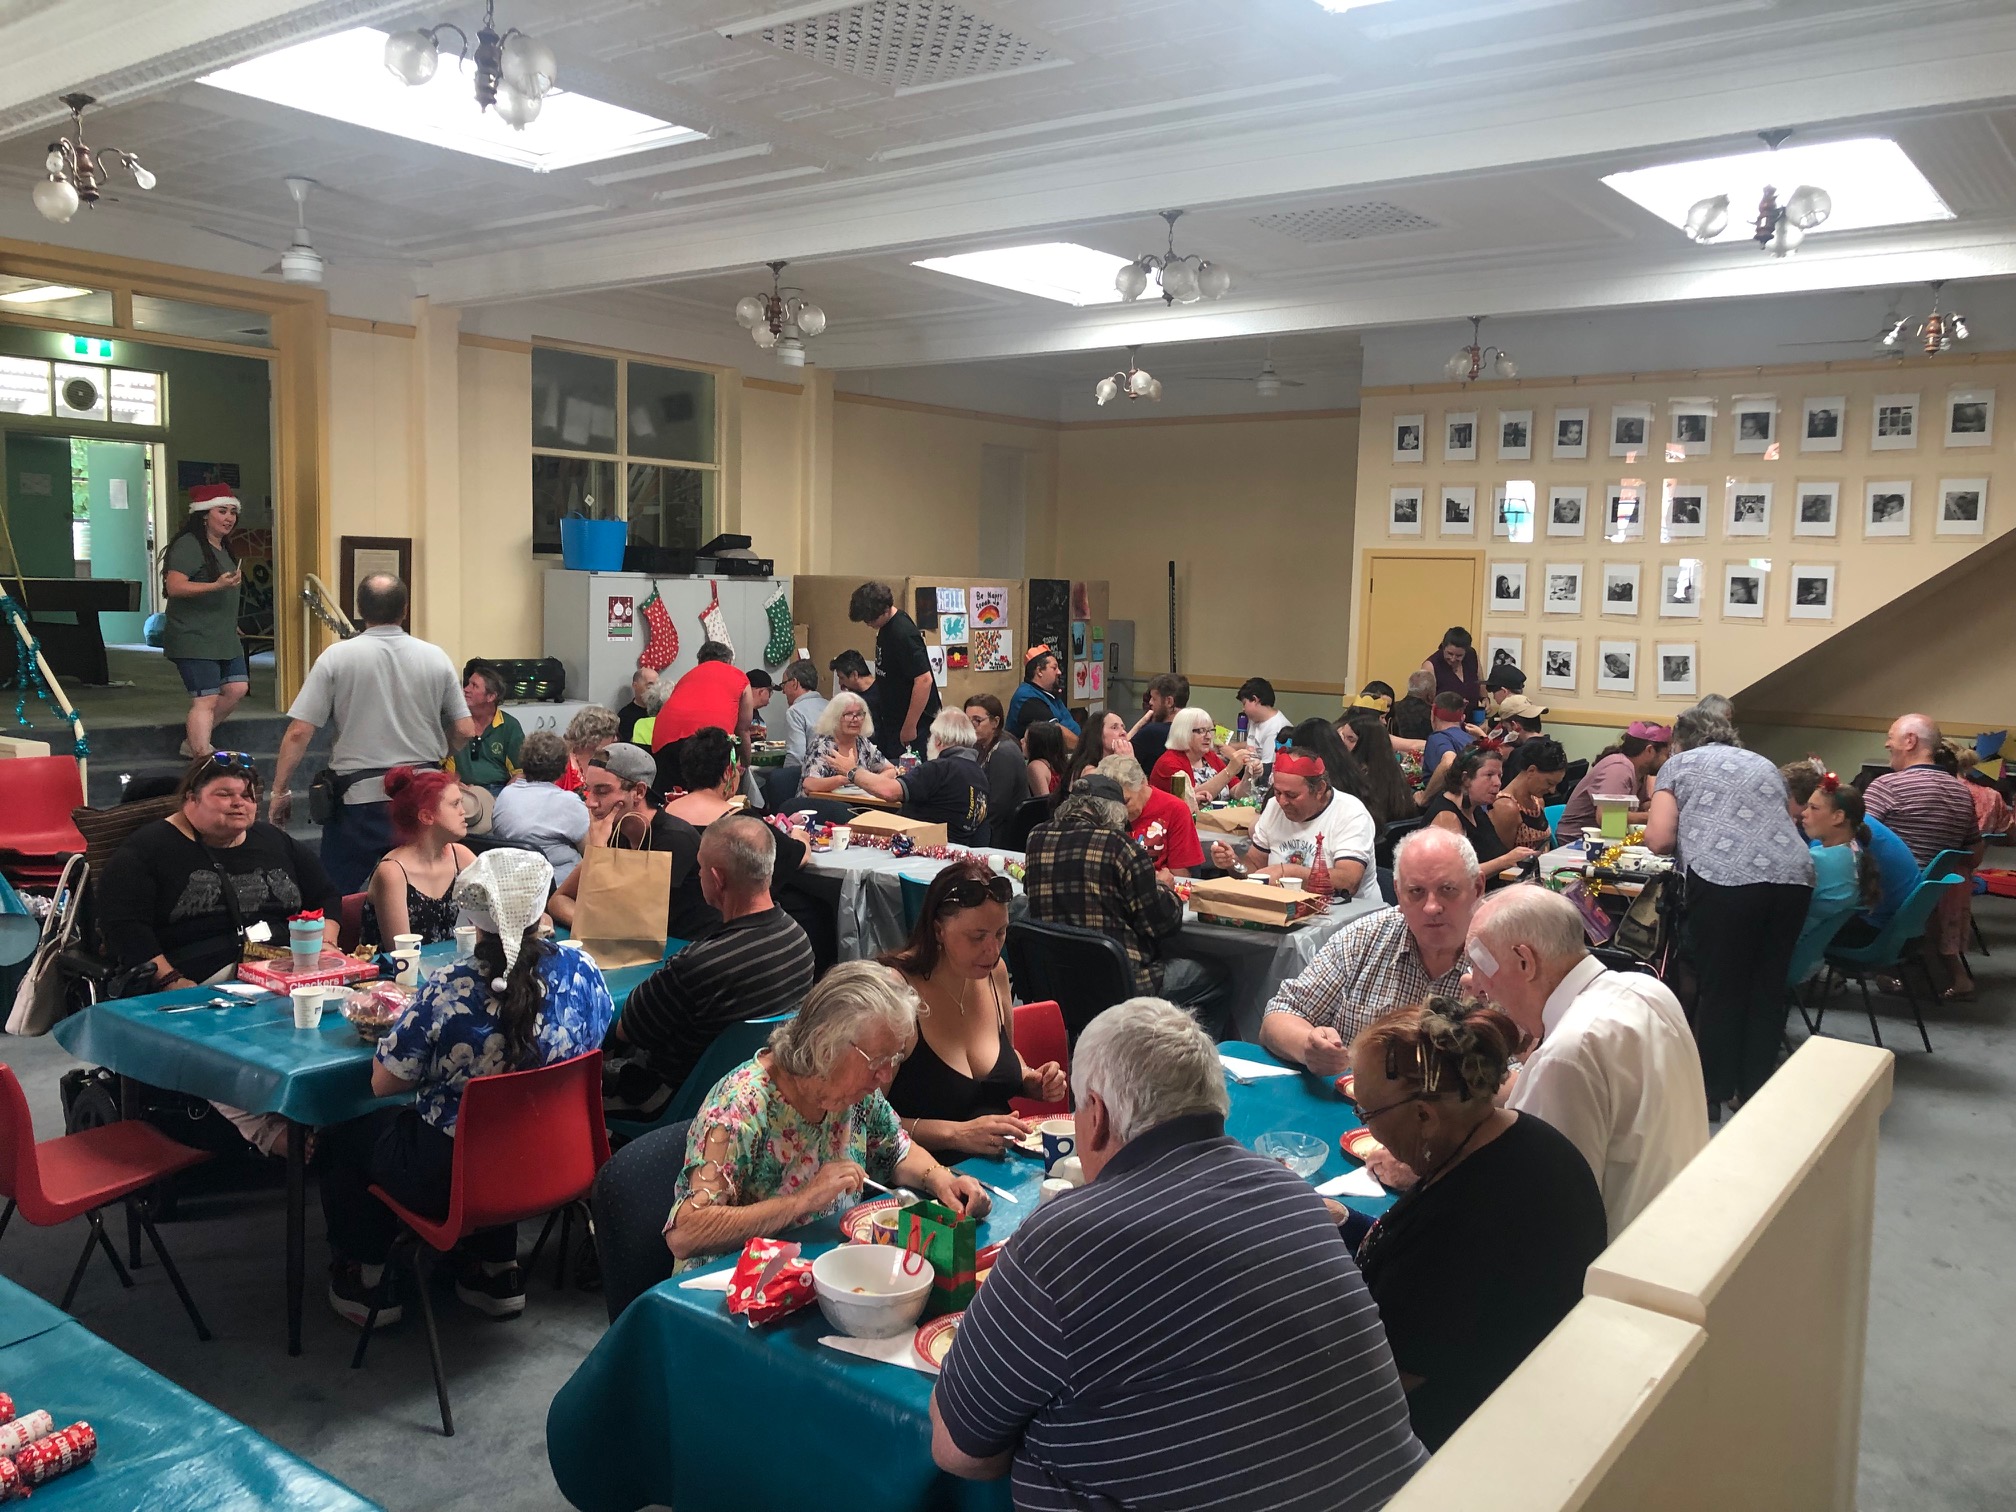 Cooma Christmas lunch brings community together